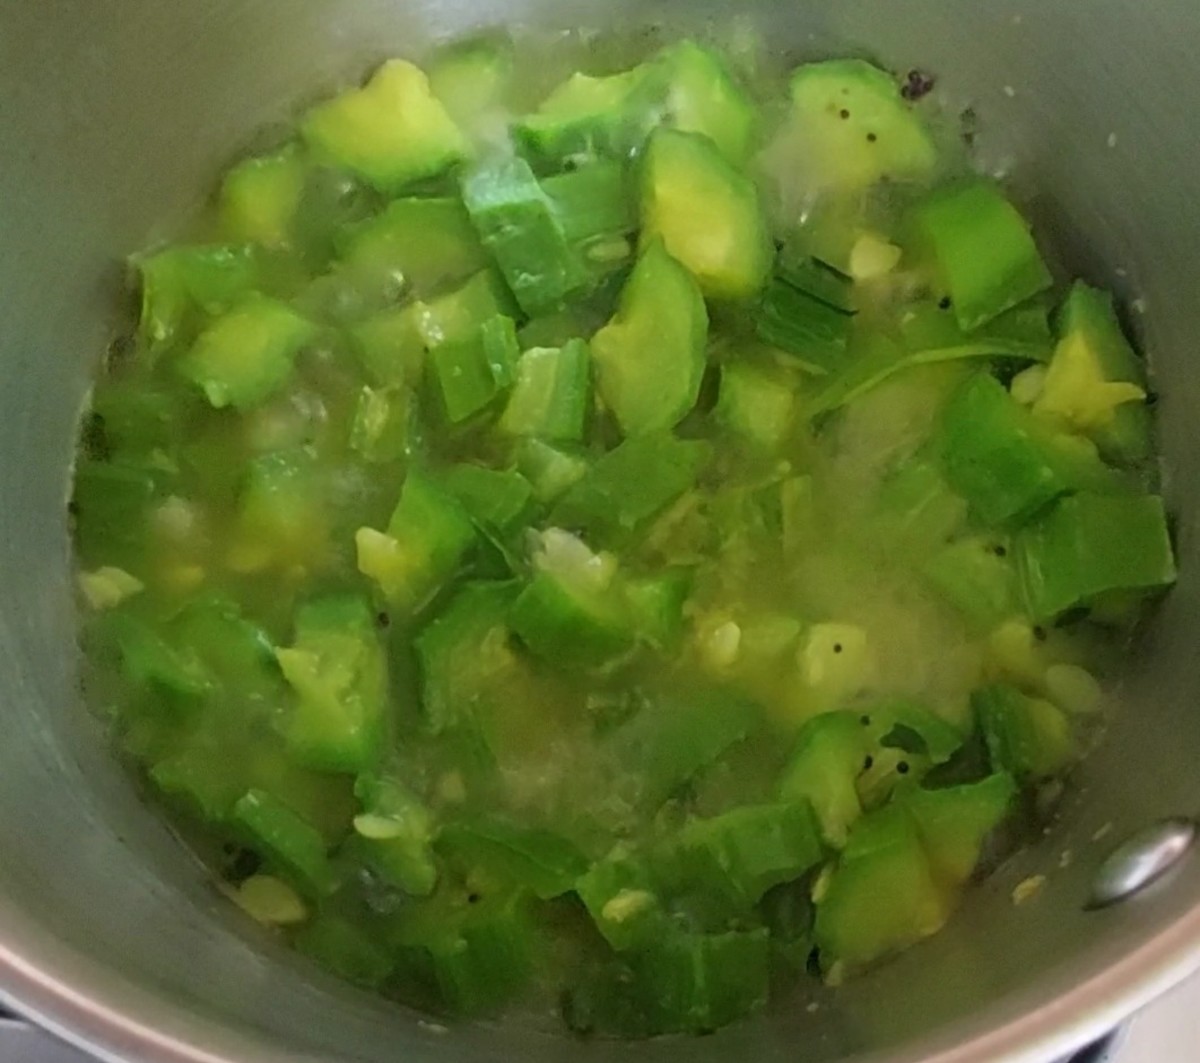 Ridge gourd is cooked well. 